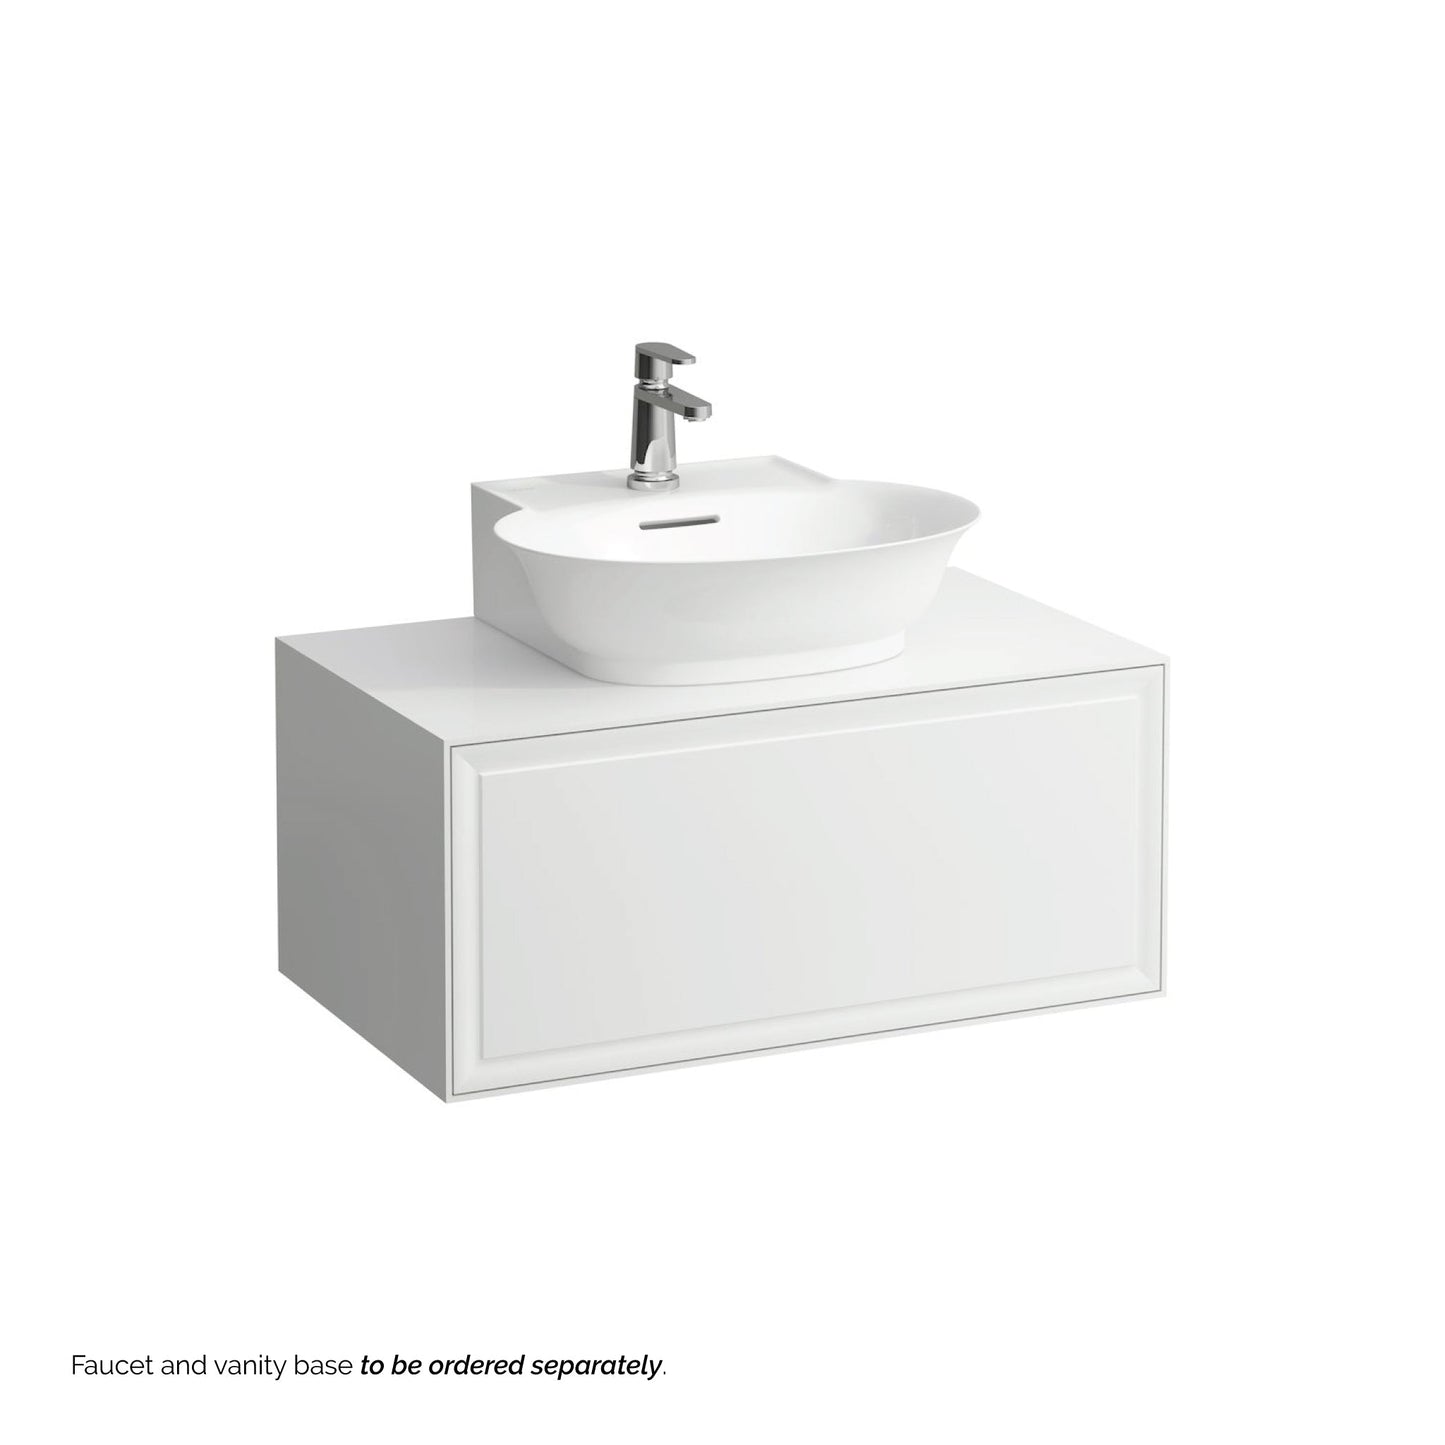 Laufen New Classic 20" x 18" White Ceramic Countertop Bathroom Sink With Faucet Hole